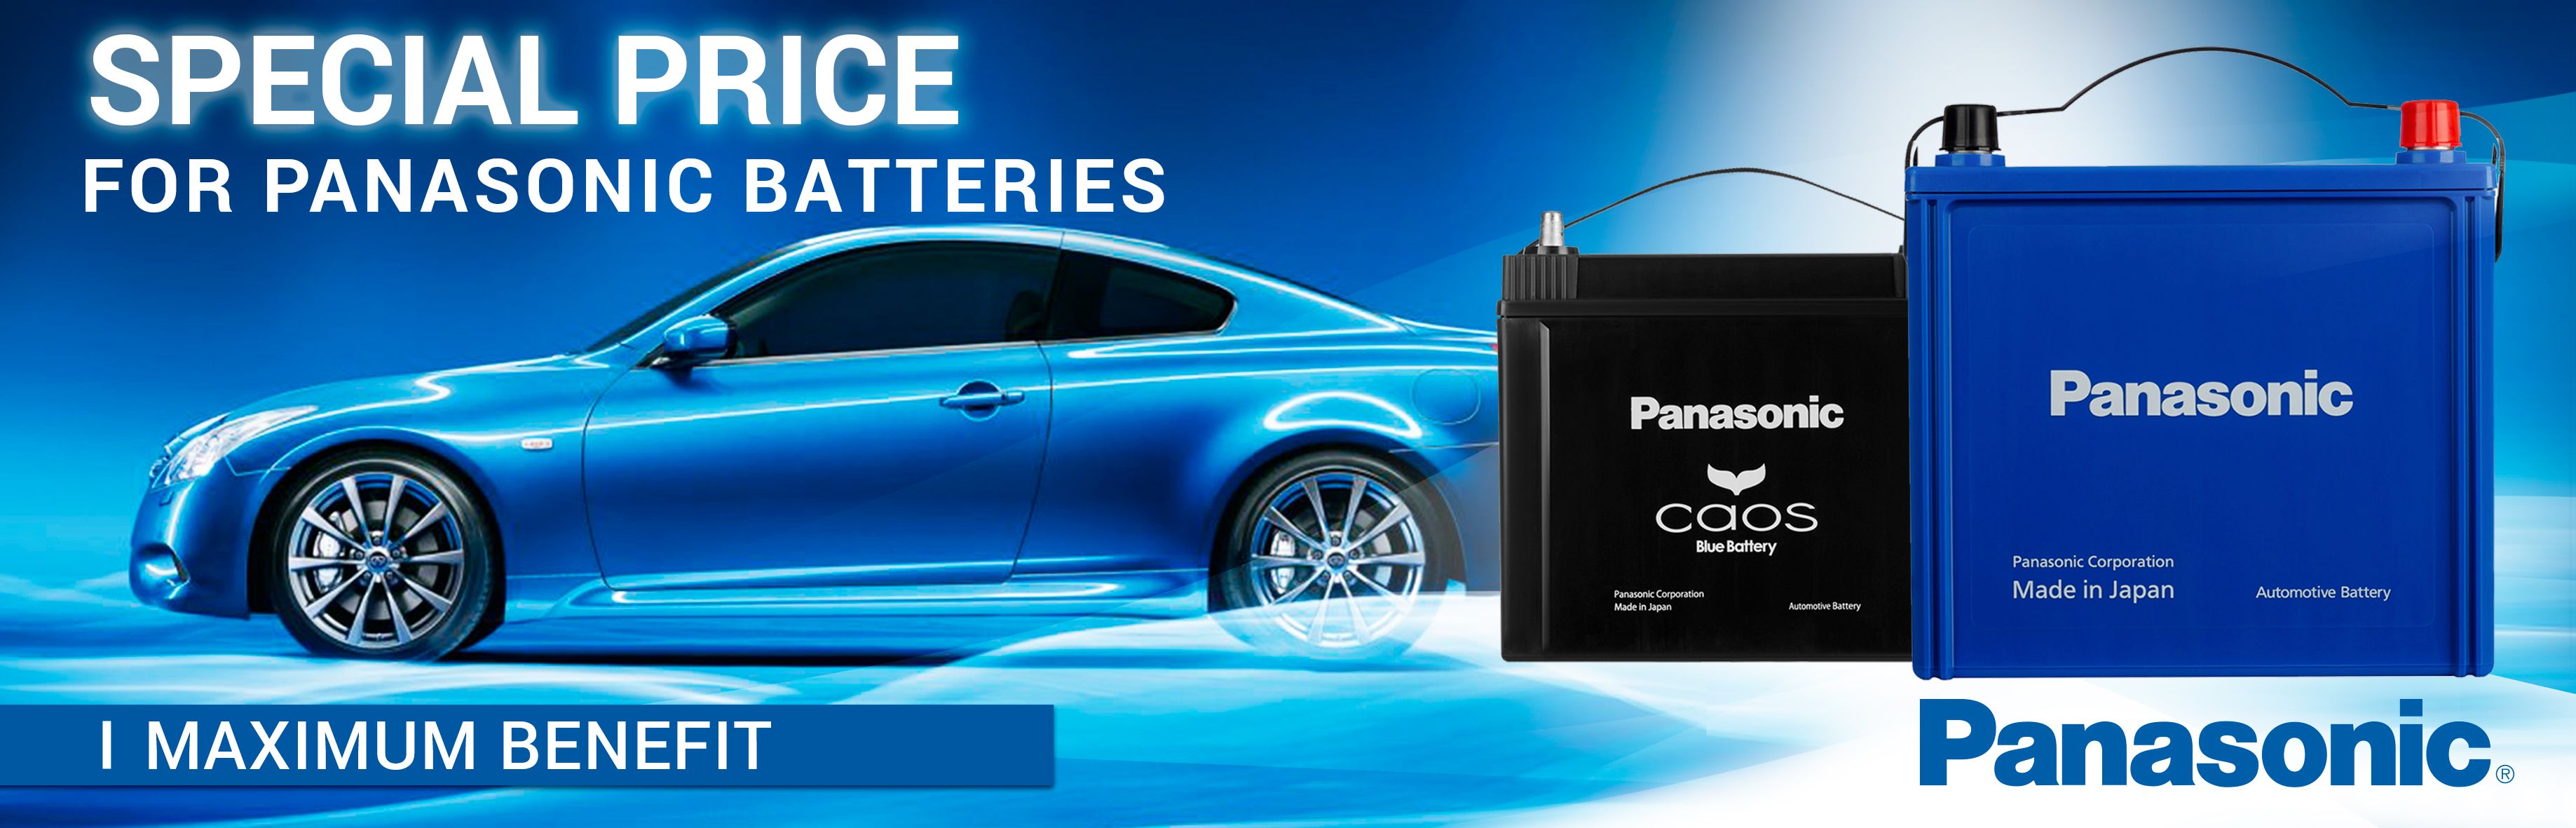 SPECIAL PRICE FOR PANASONIC BATTERIES